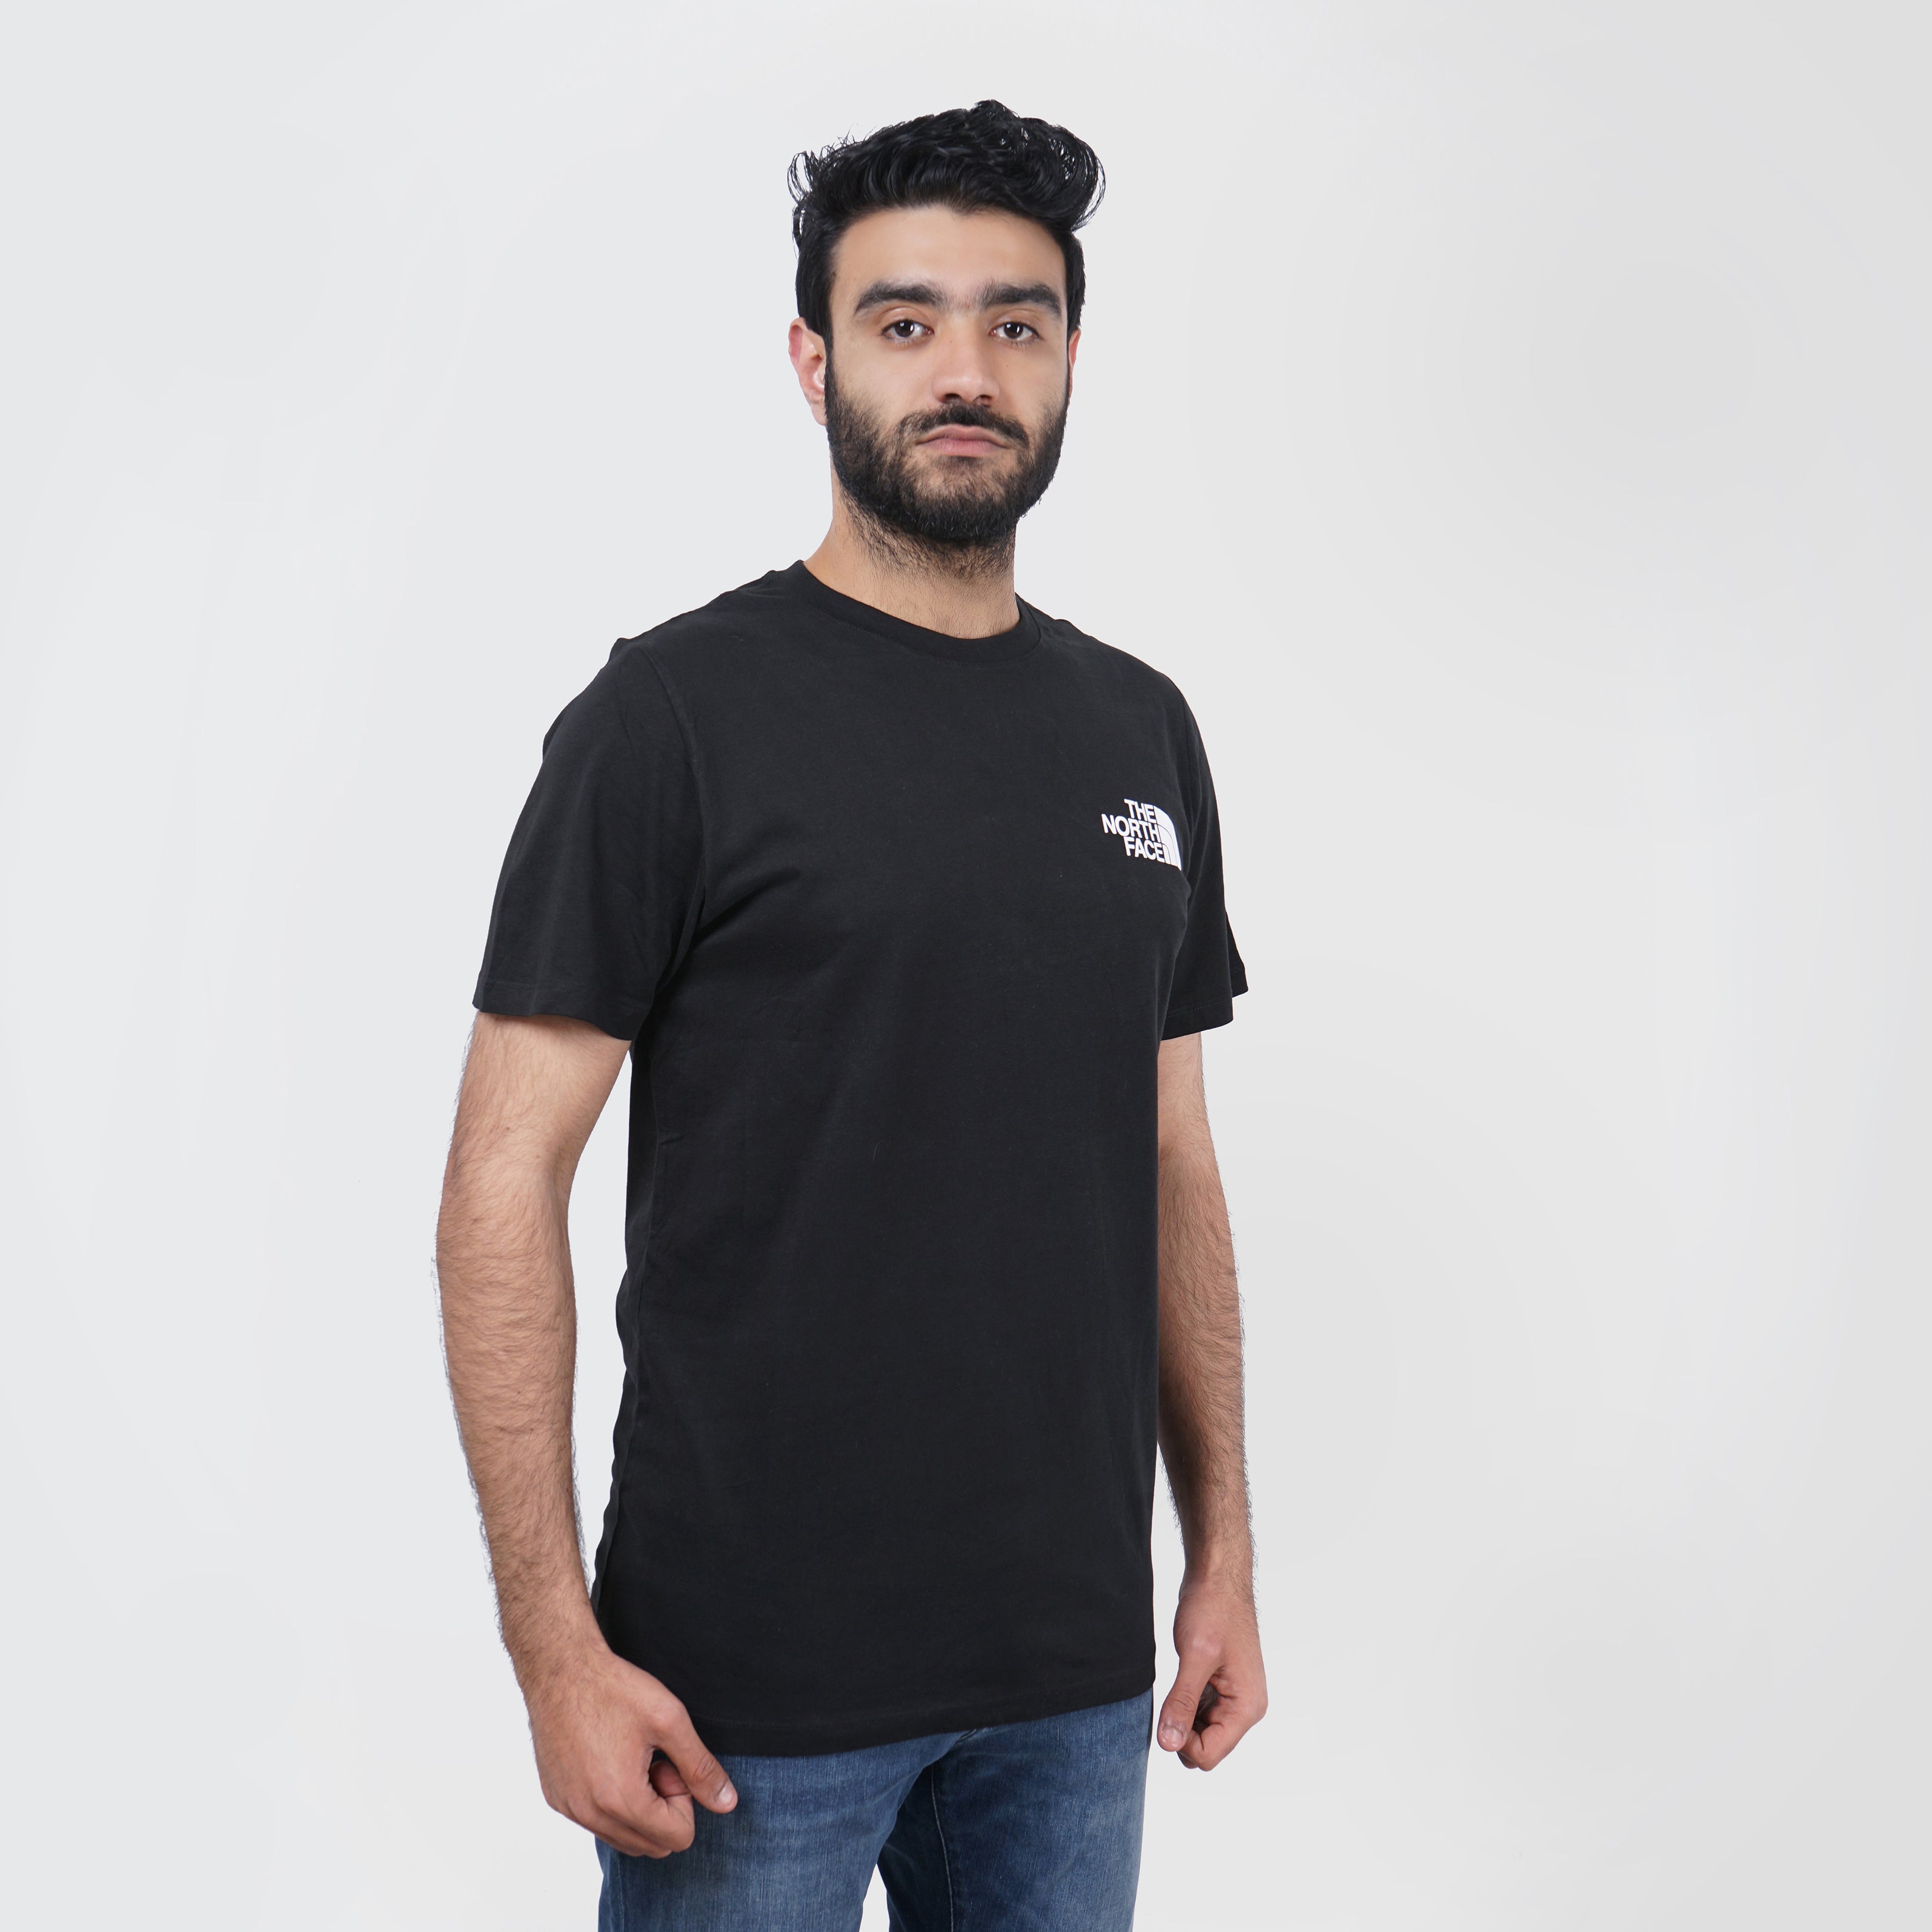 The North Face Printed Black T-Shirt - Marca Deals - The North Face